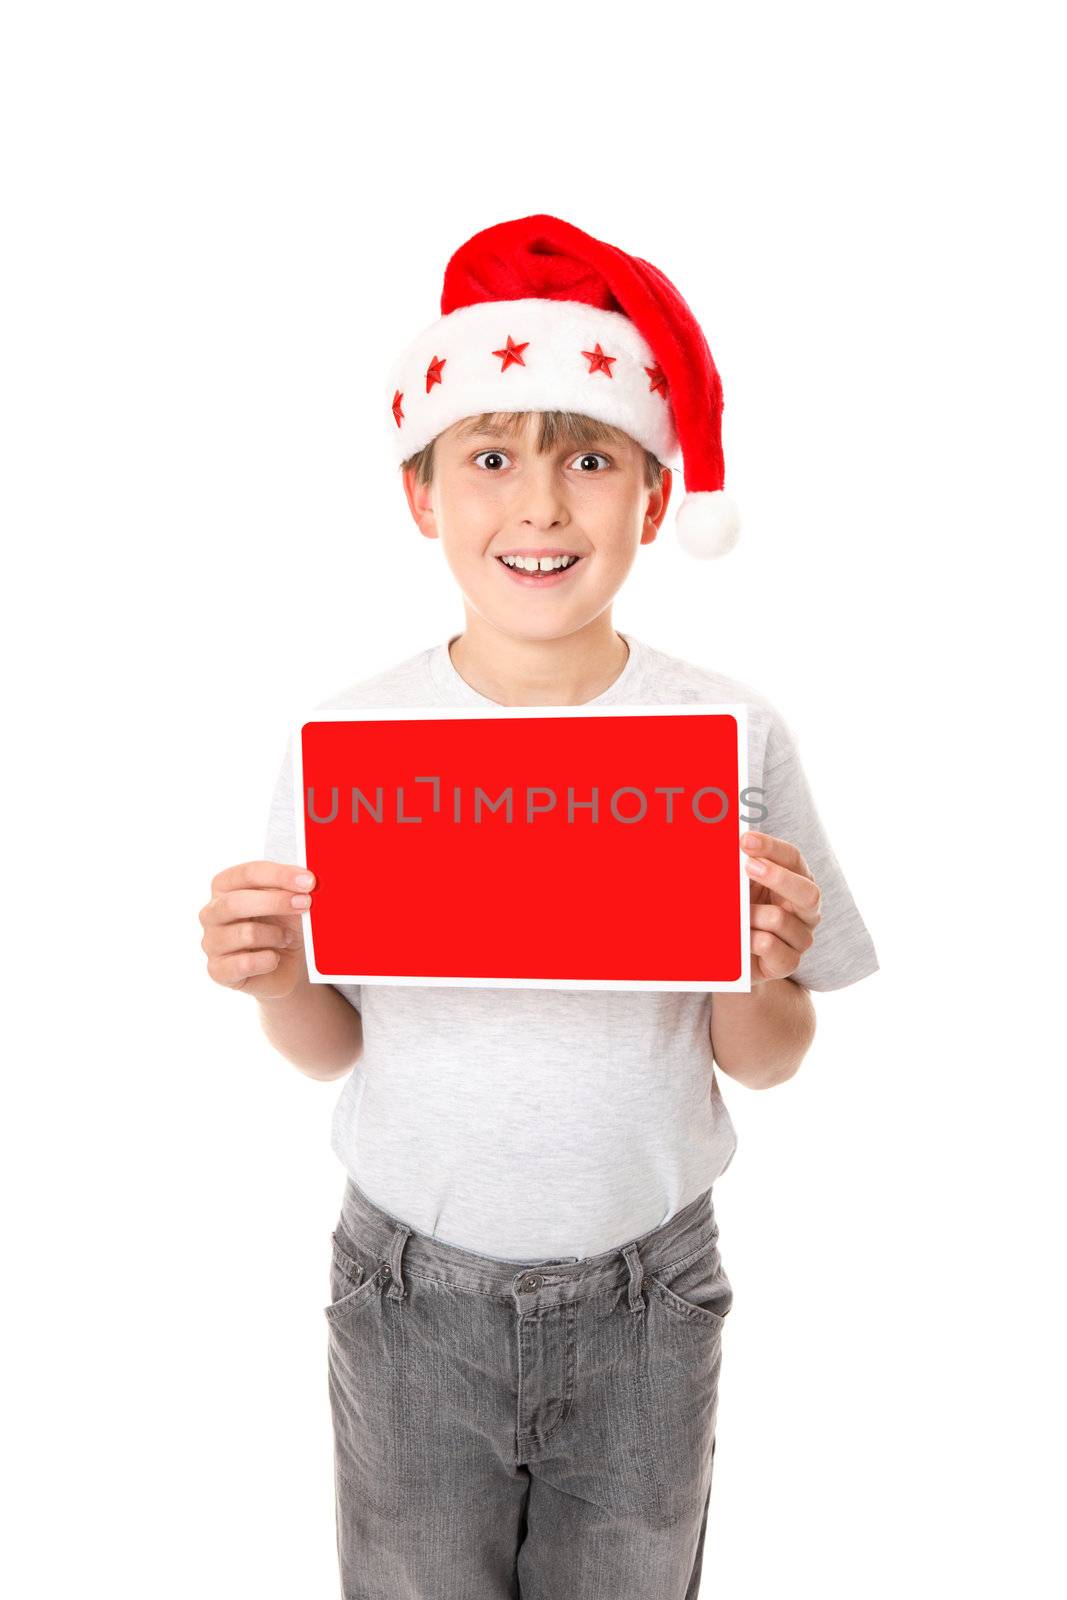 A child dressed in grey jeans and grey marle t-shirt and wearing a red santa hat holding a small red and white blank sign ready for your message or graphics.